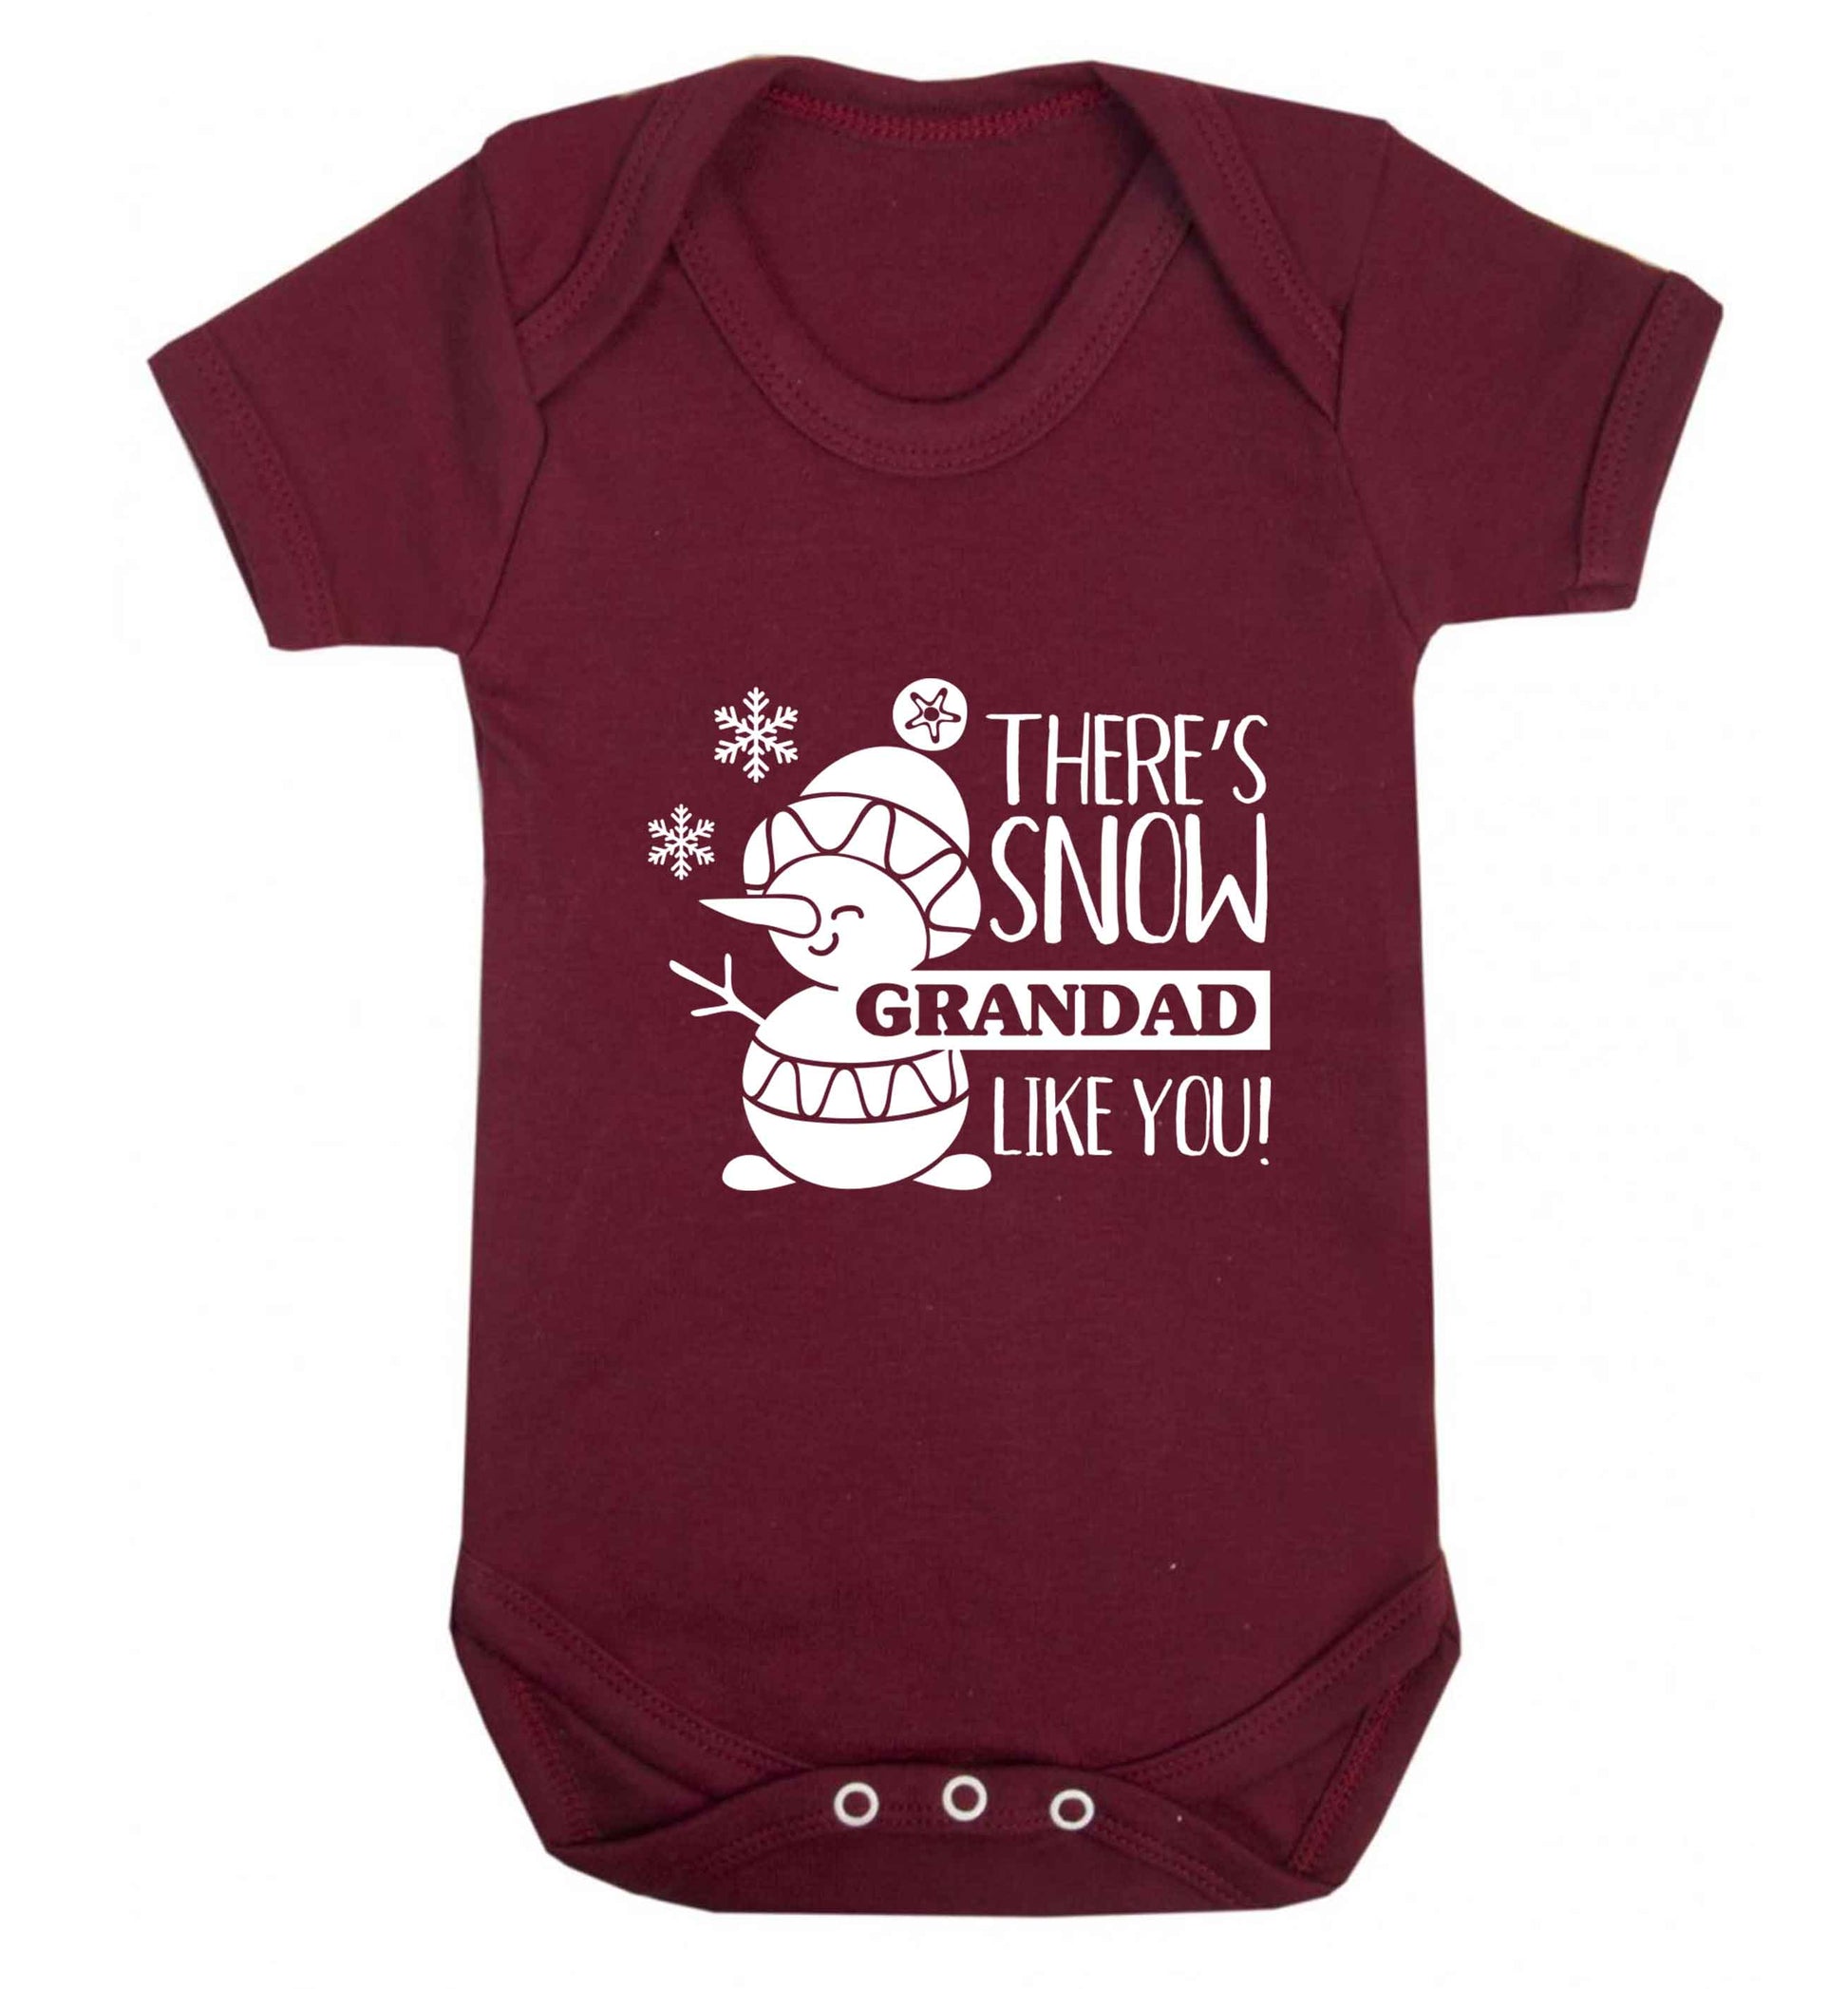 There's snow grandad like you baby vest maroon 18-24 months